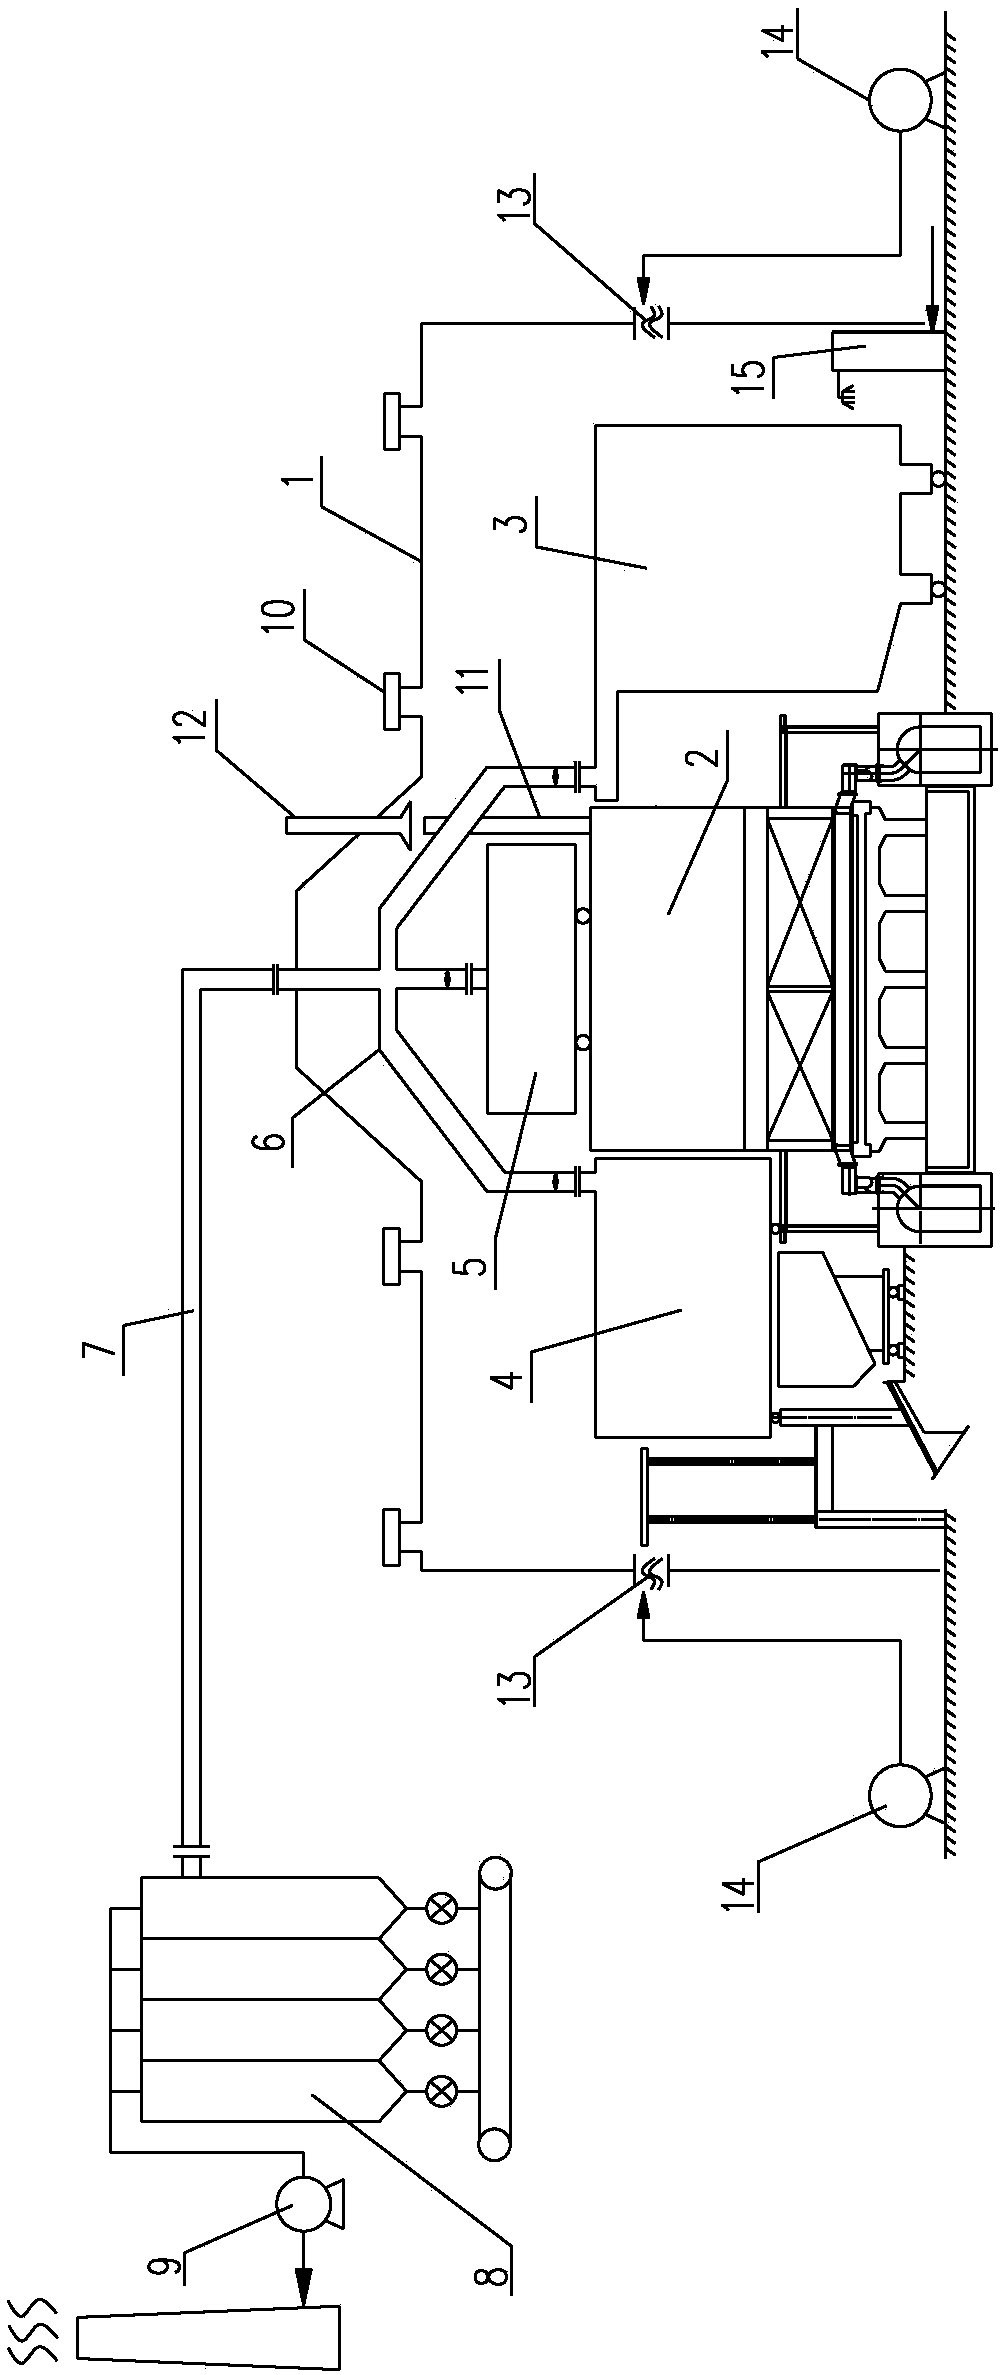 Coke oven smoke dust fullytotally-closed centralized collection and treatment apparatus